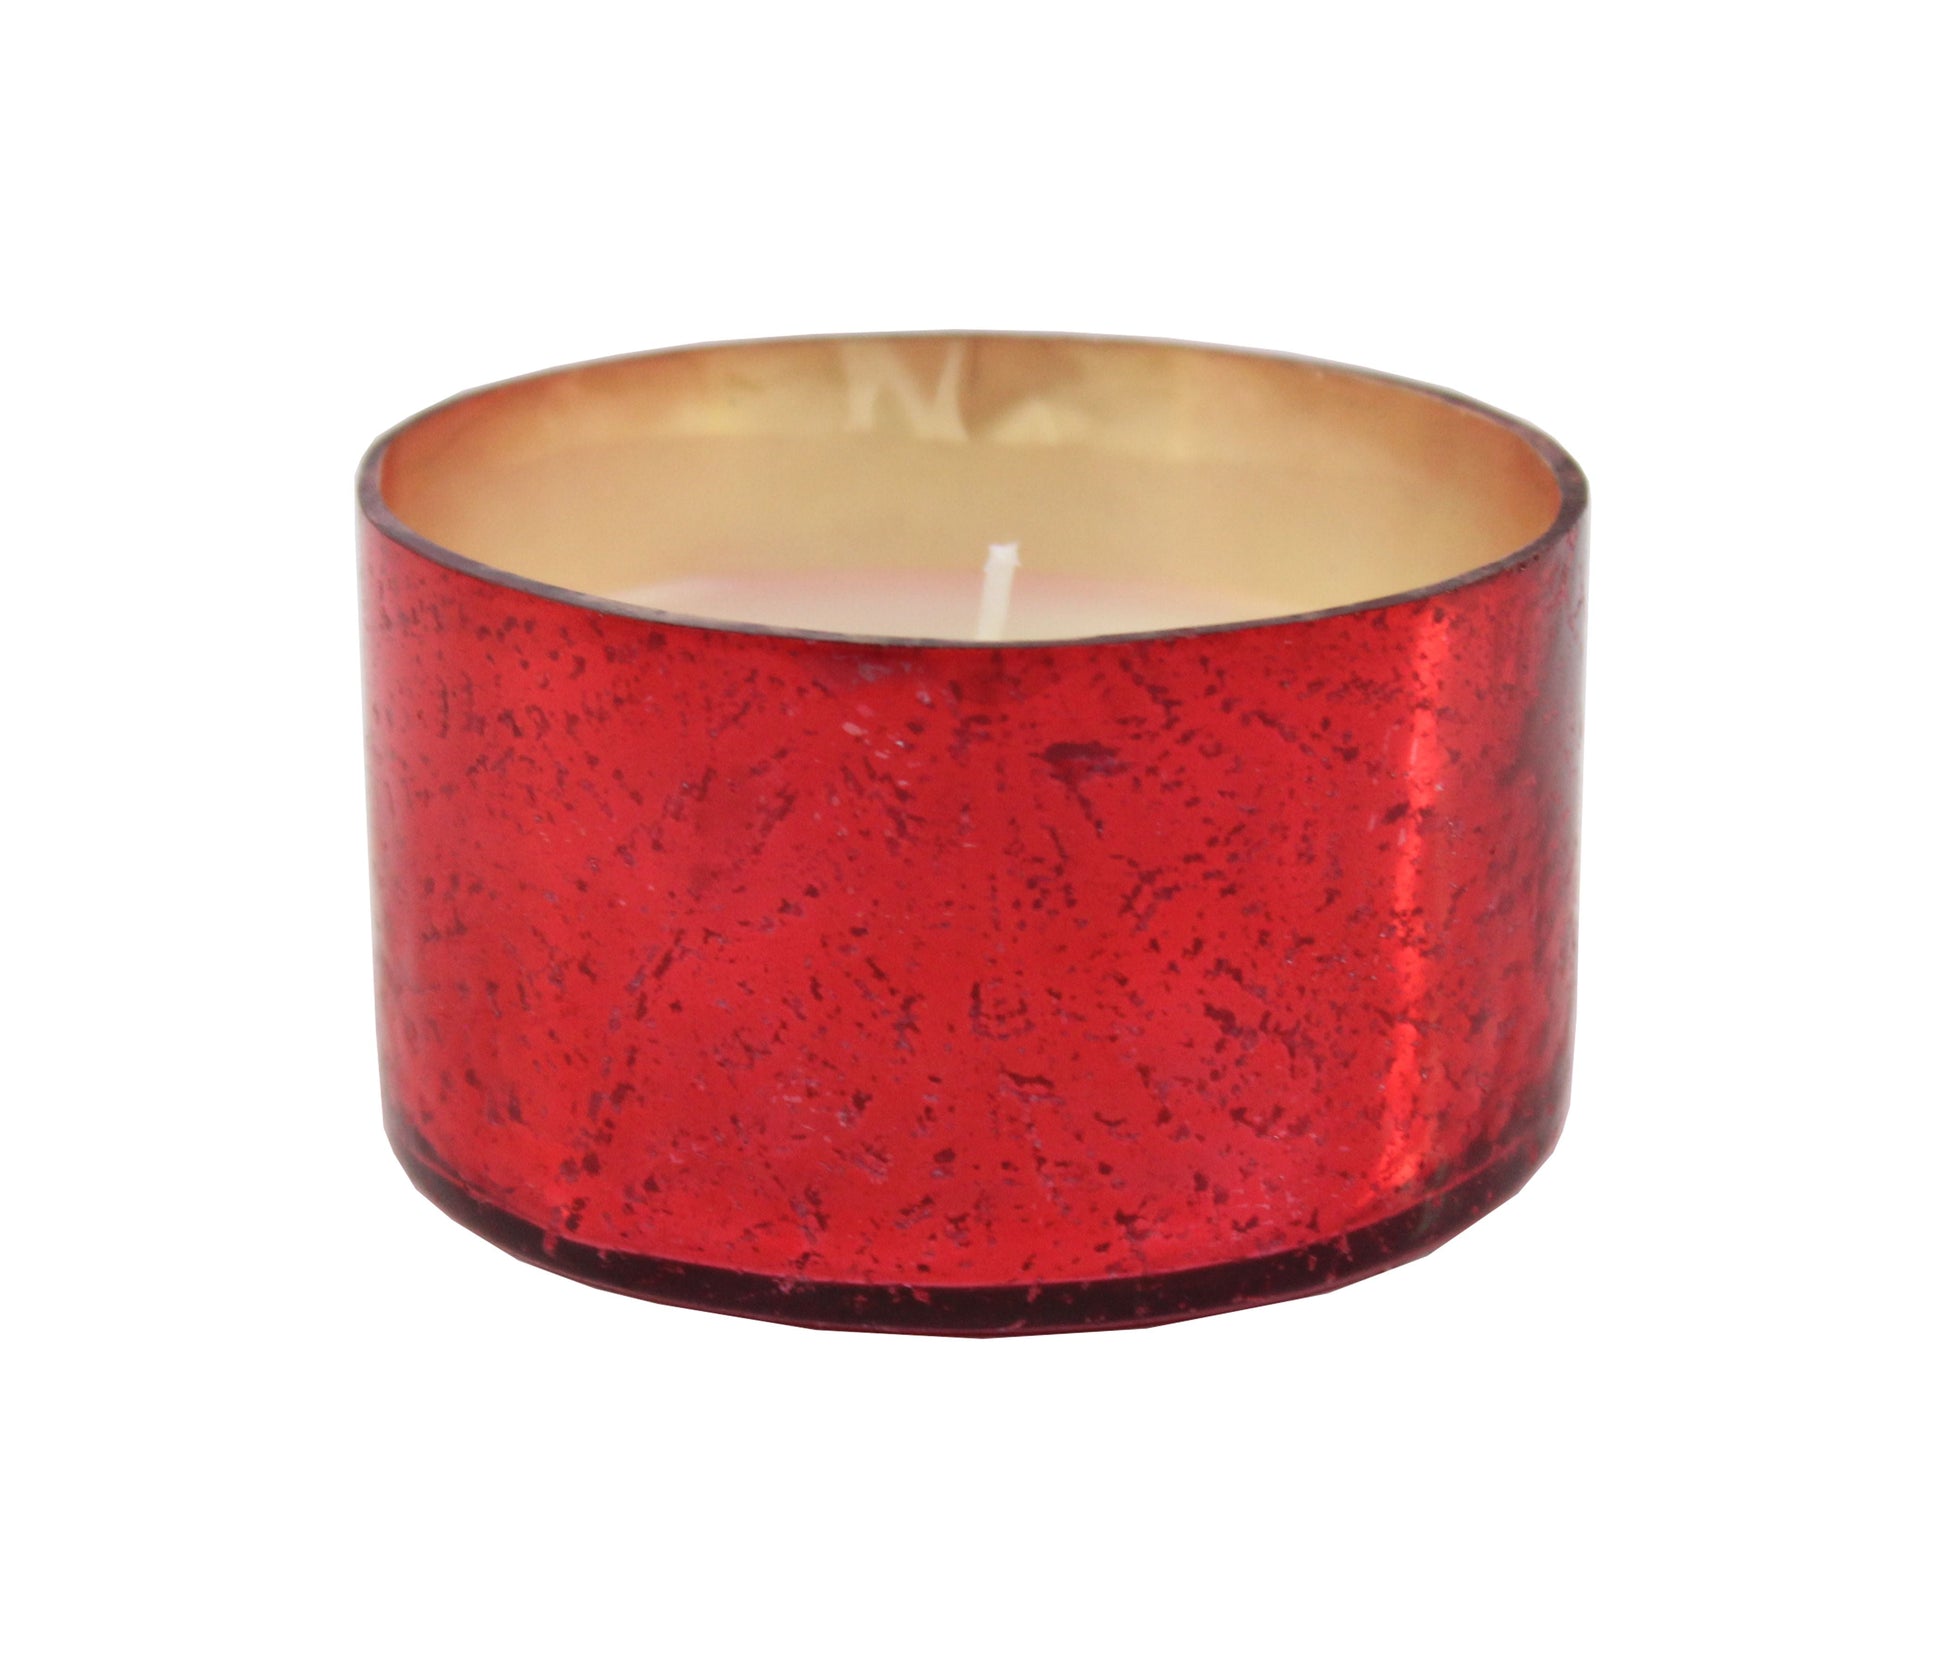 Hosley Sweet Pea Jasmine Fragrance Mercury Red Round  Glass Candle for Home Decoration/ Gifting/ Party